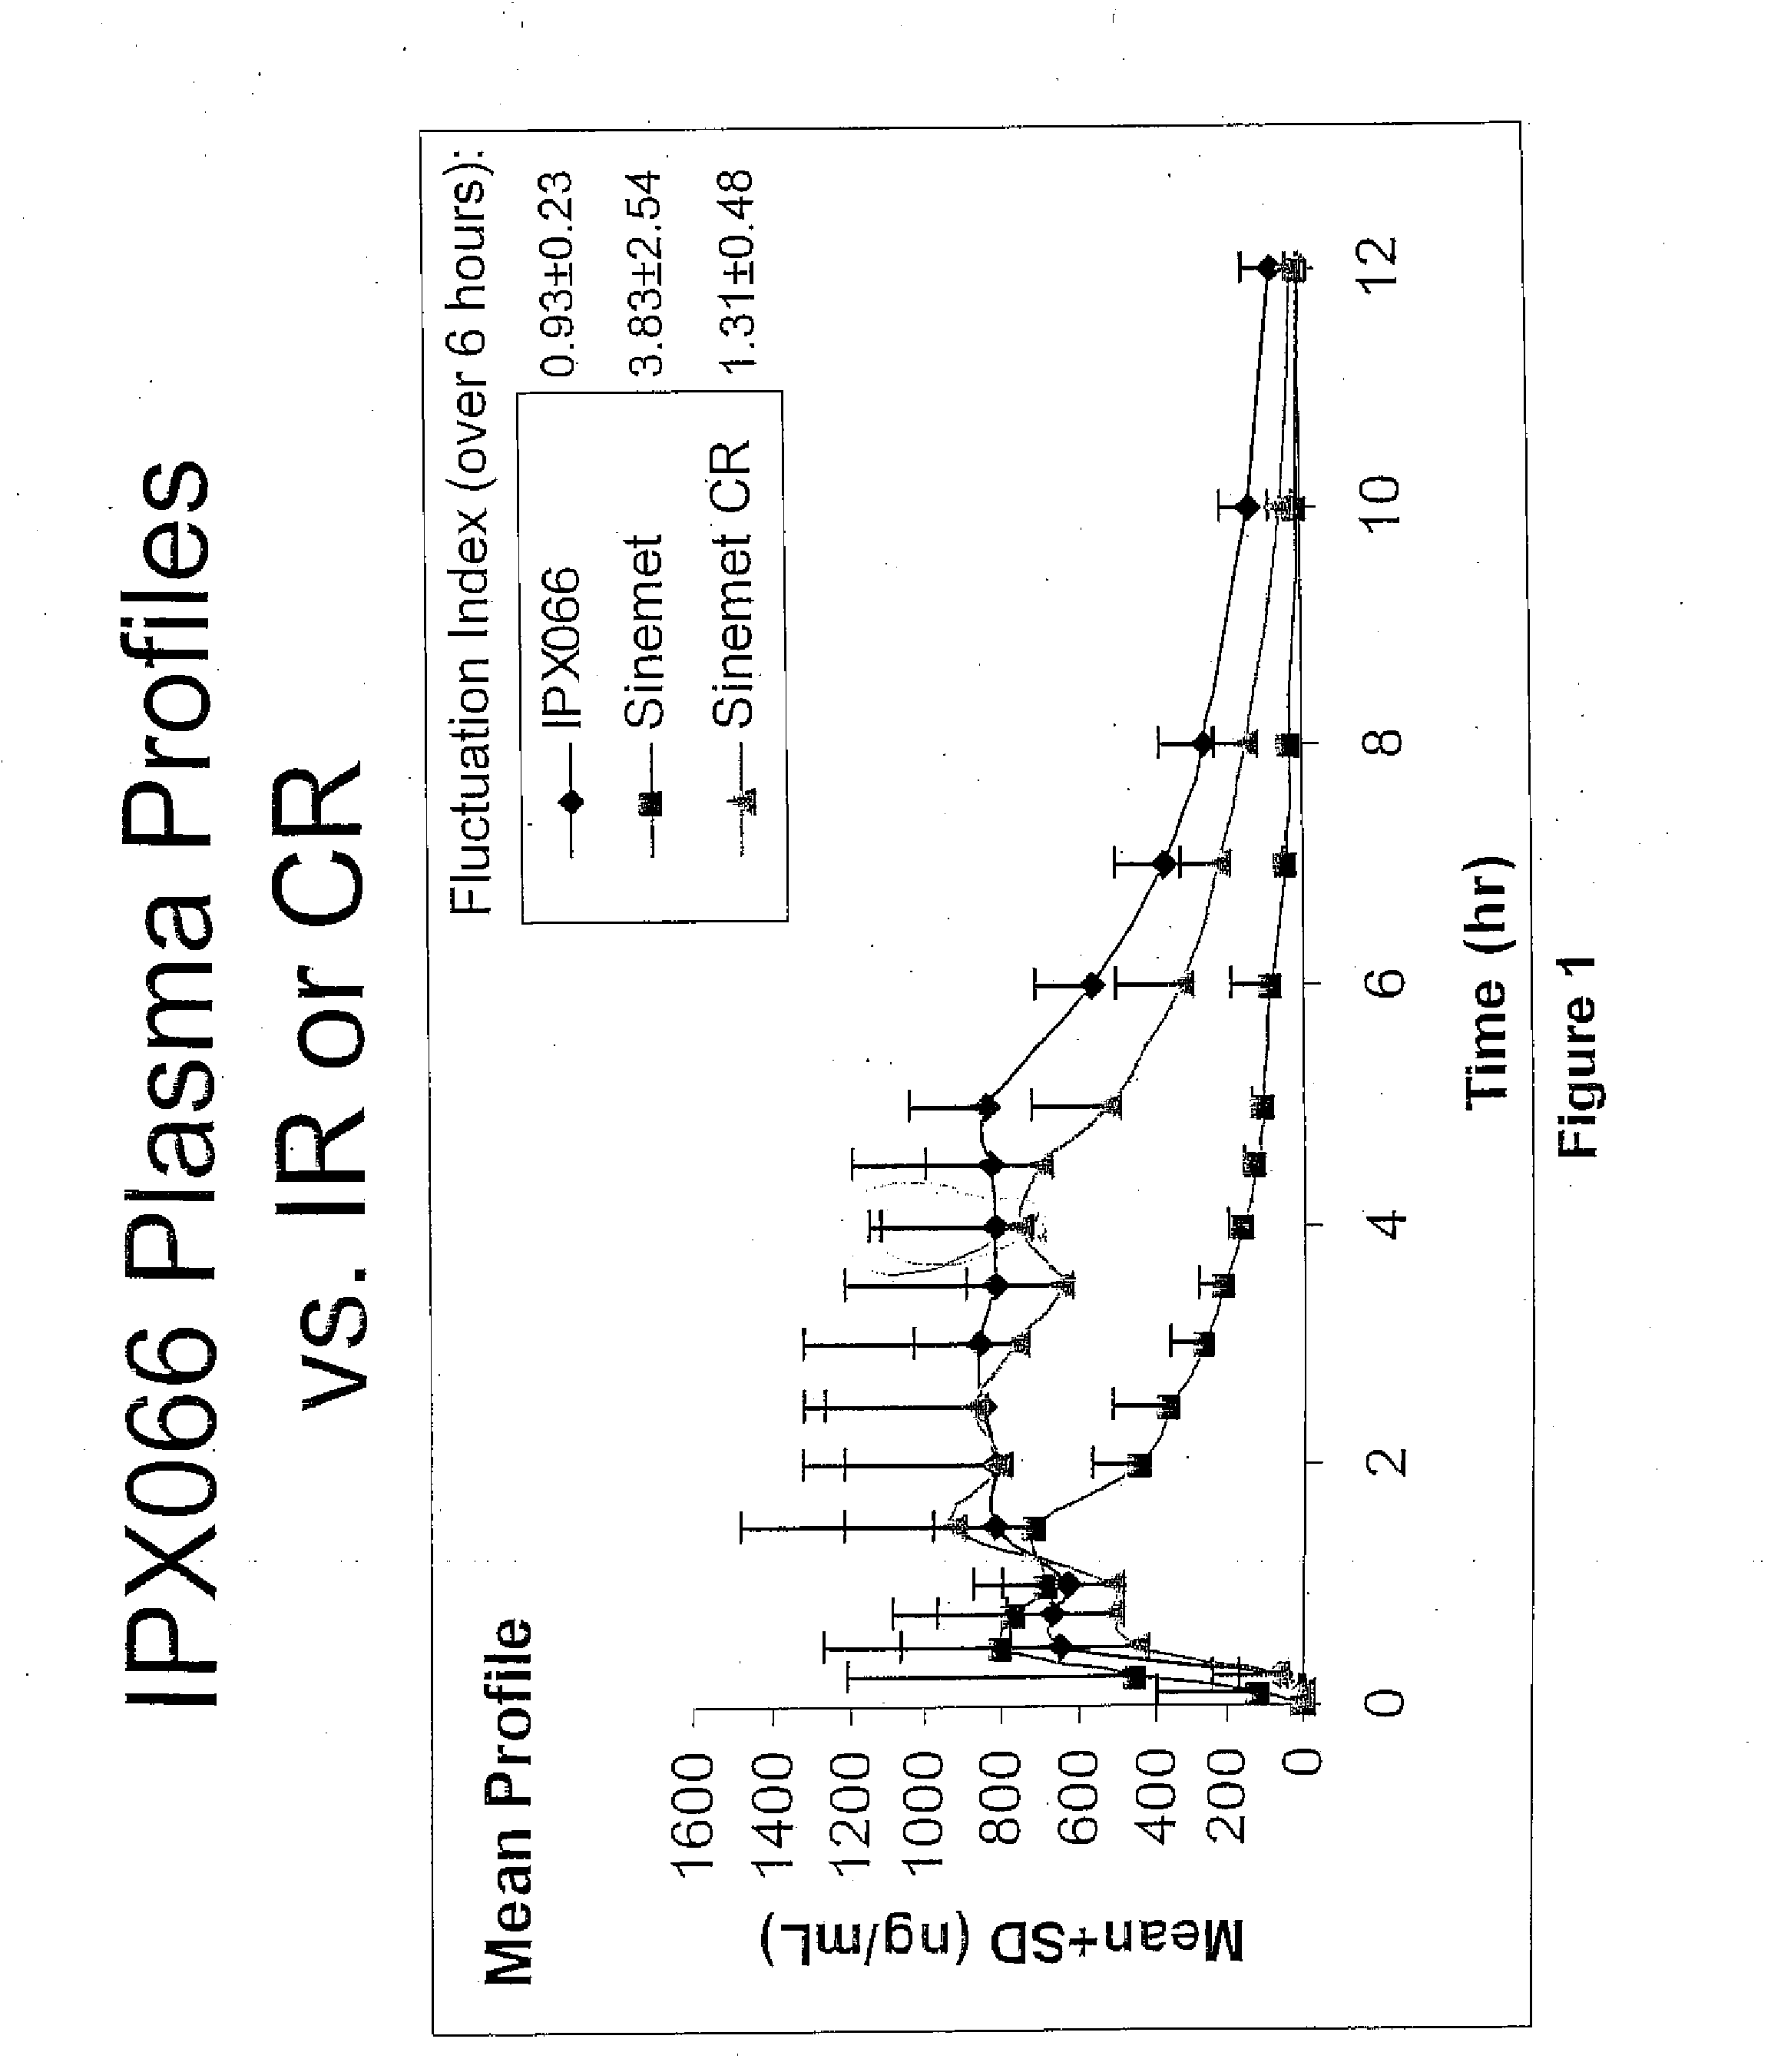 Controlled release formulations of levodopa and uses thereof